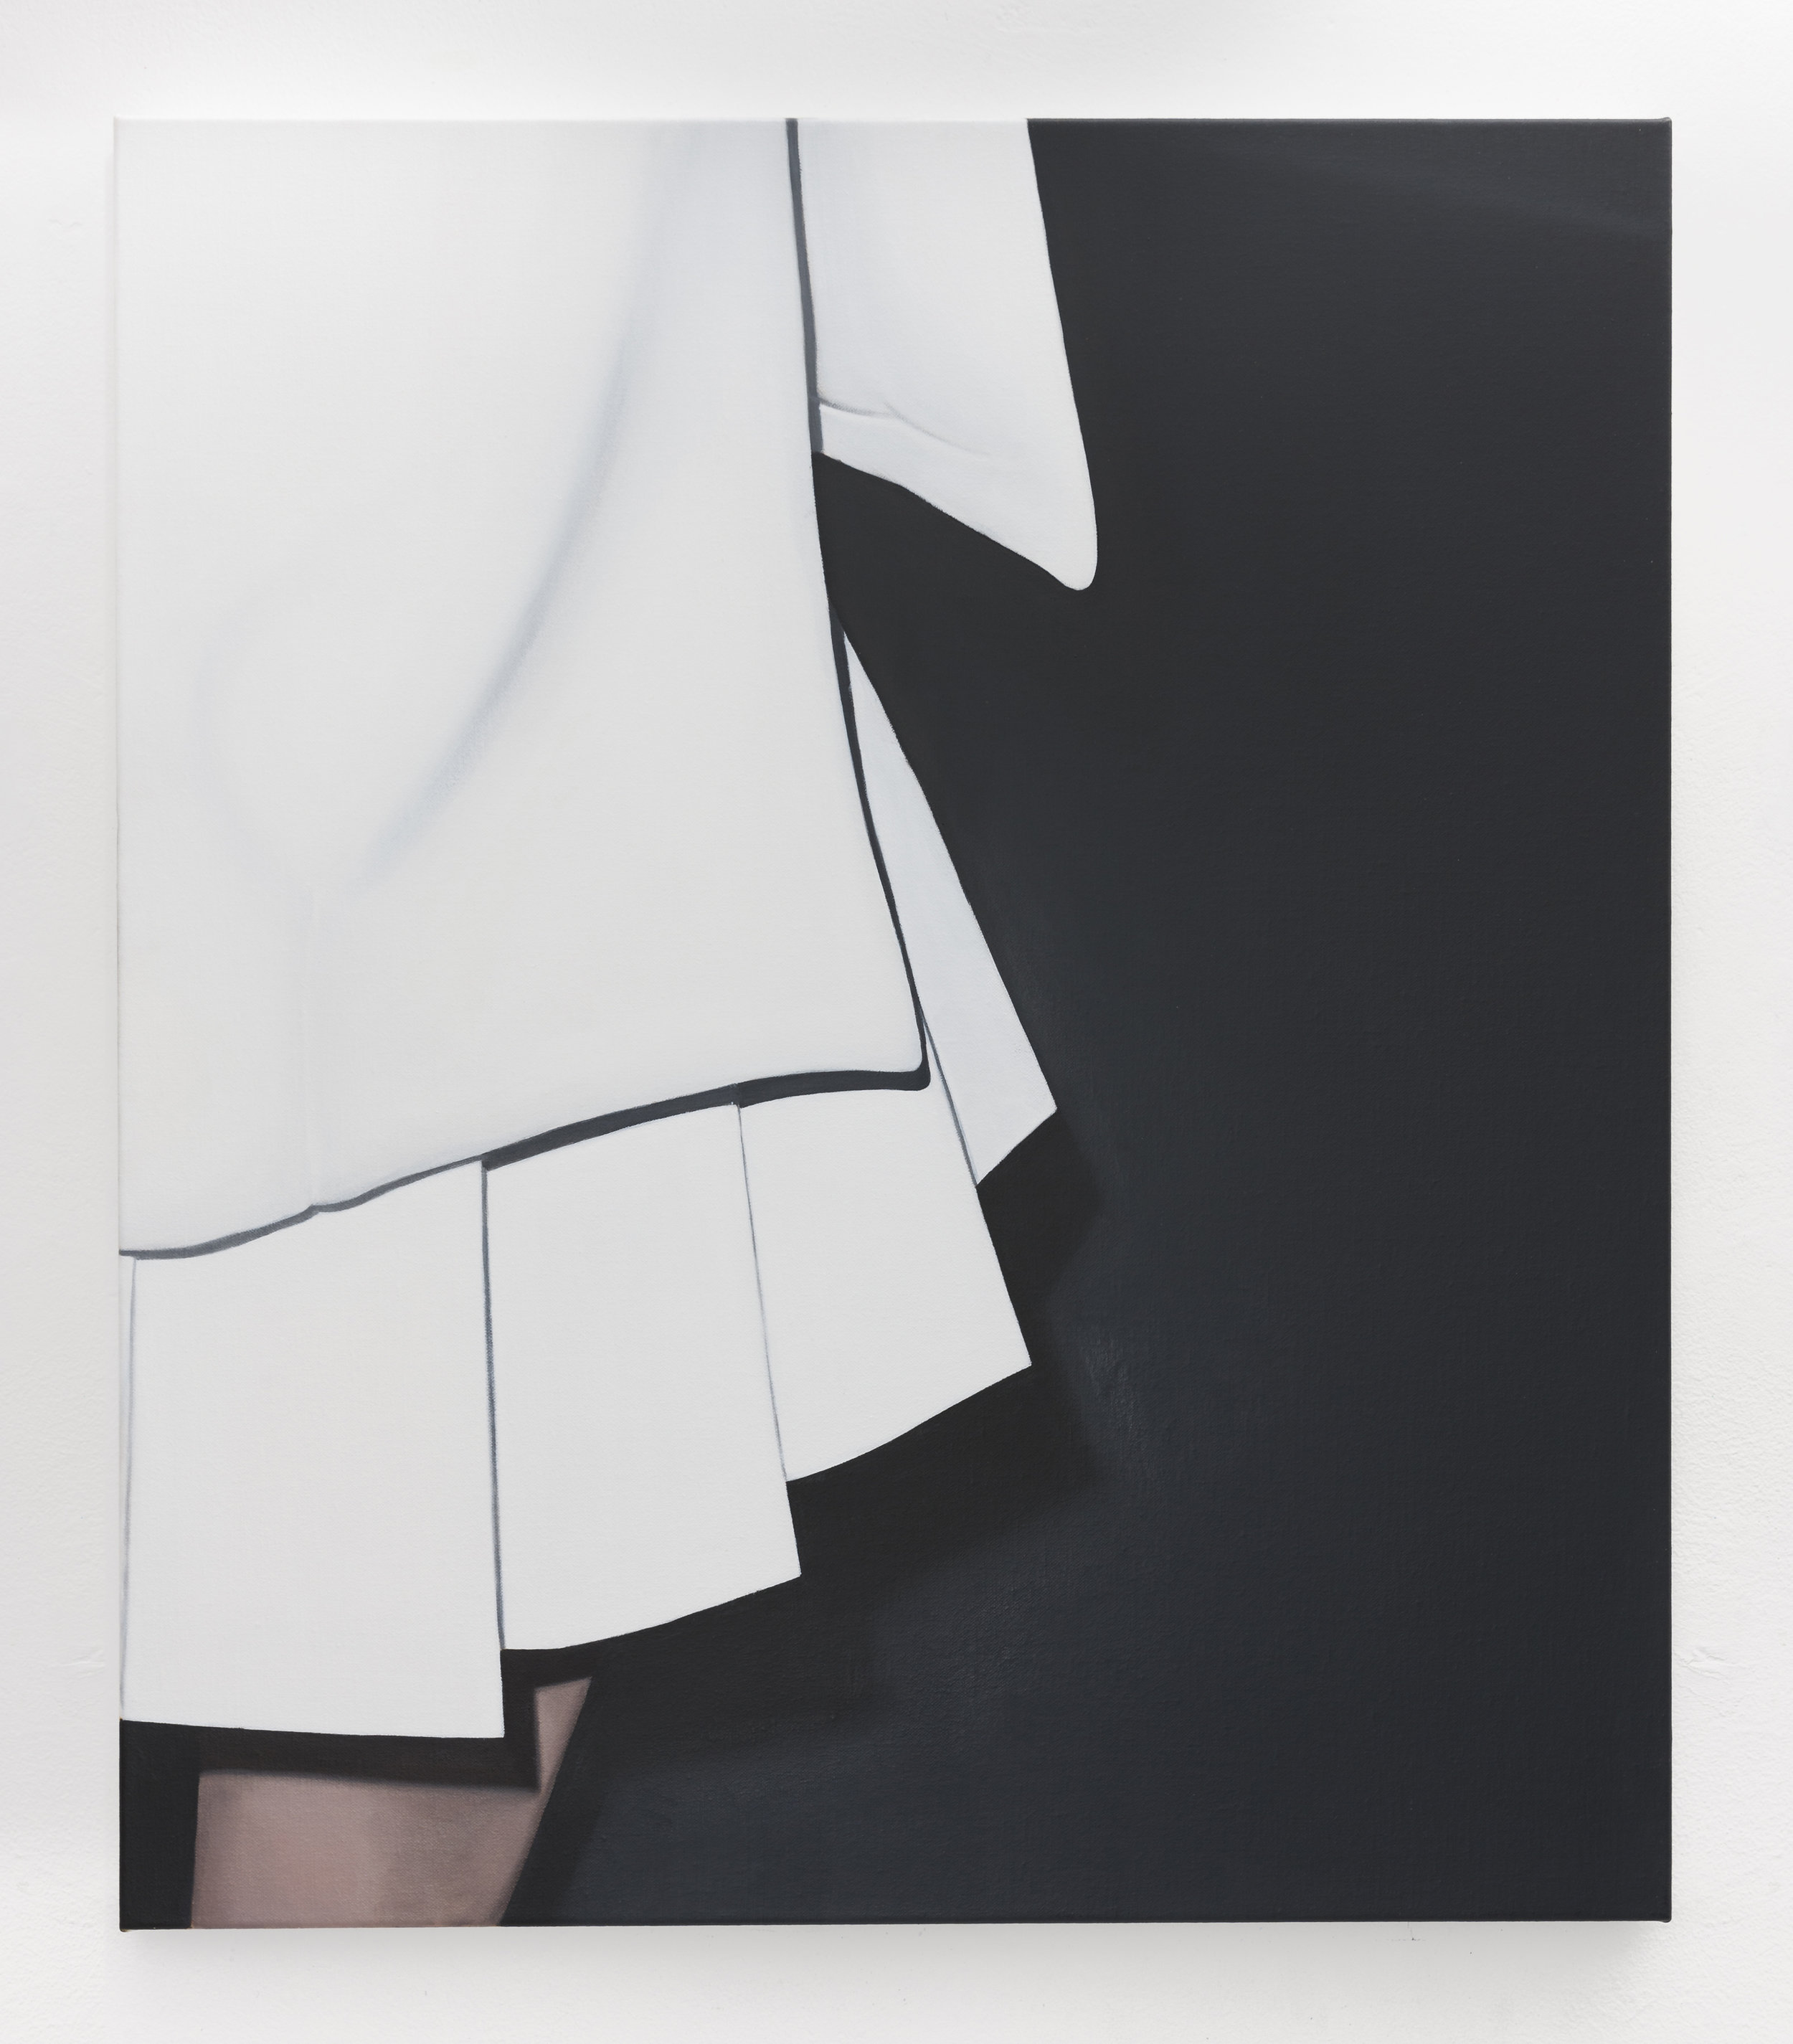  White Dress III | 2018 | oil on linen | 70 x 60 cm | 27.6 x 23.6 in | Private Collection | Photo by Lee Welch 